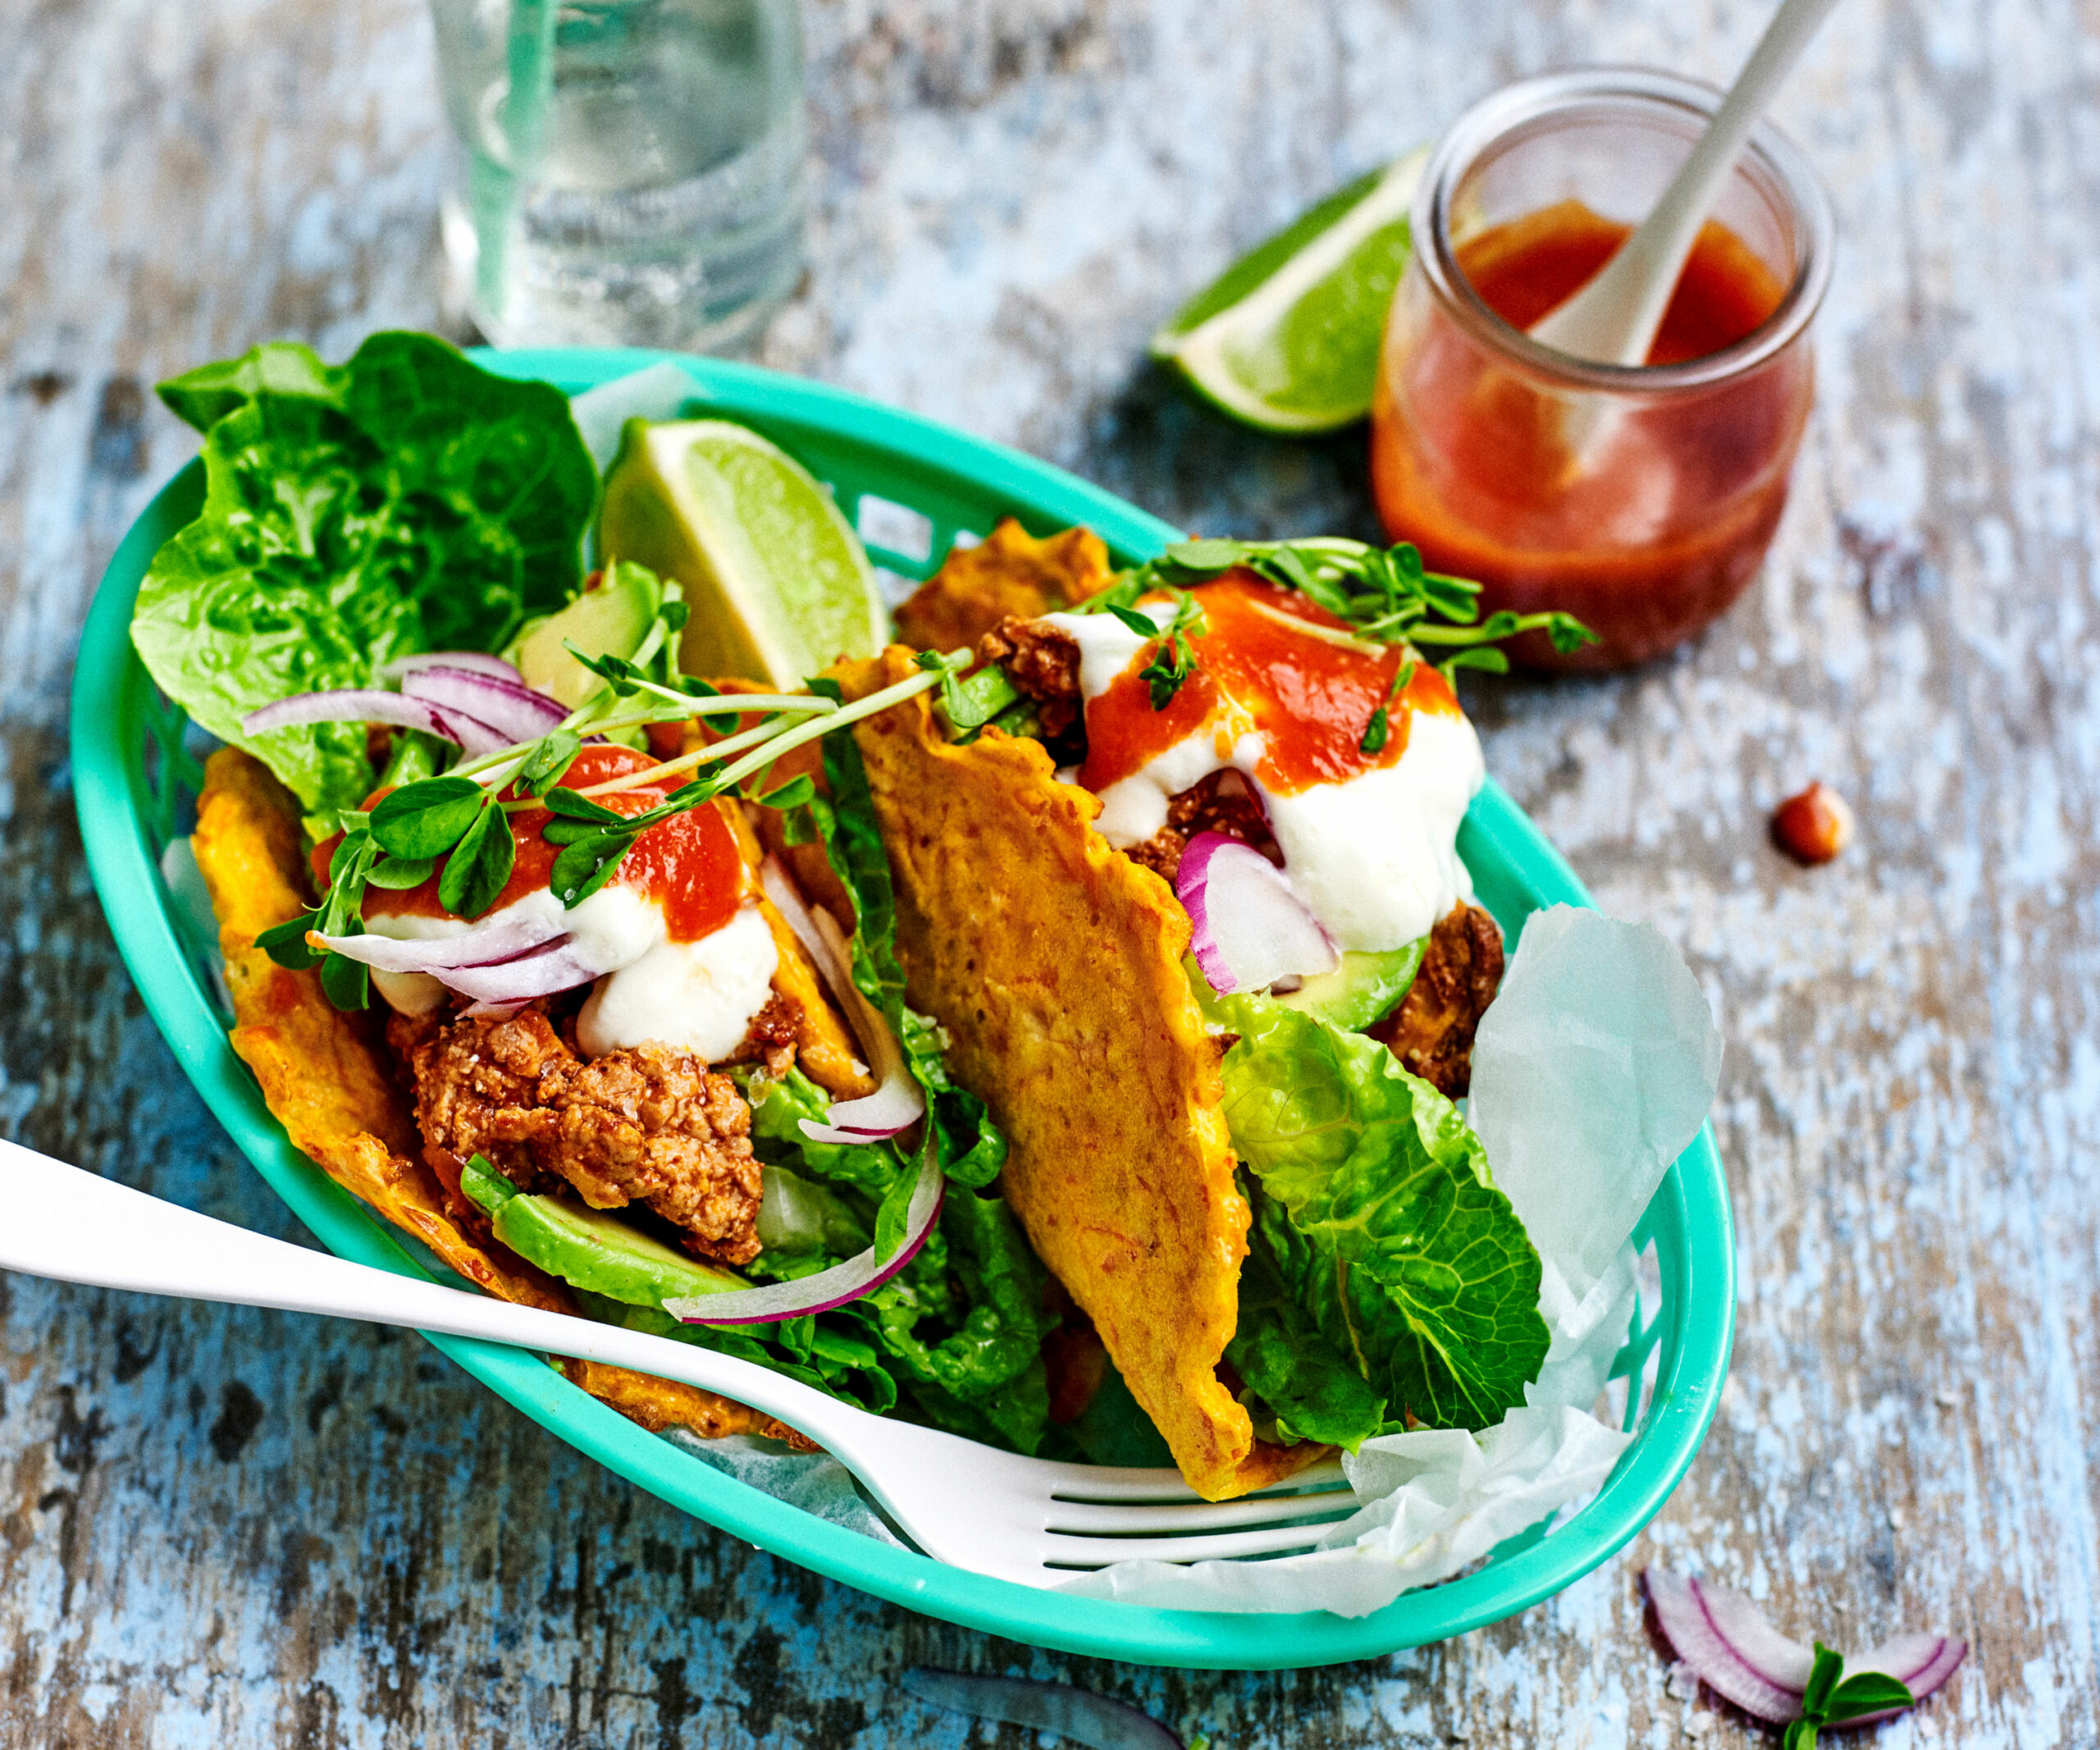 Carrot taco shells with salad and chipotle pork